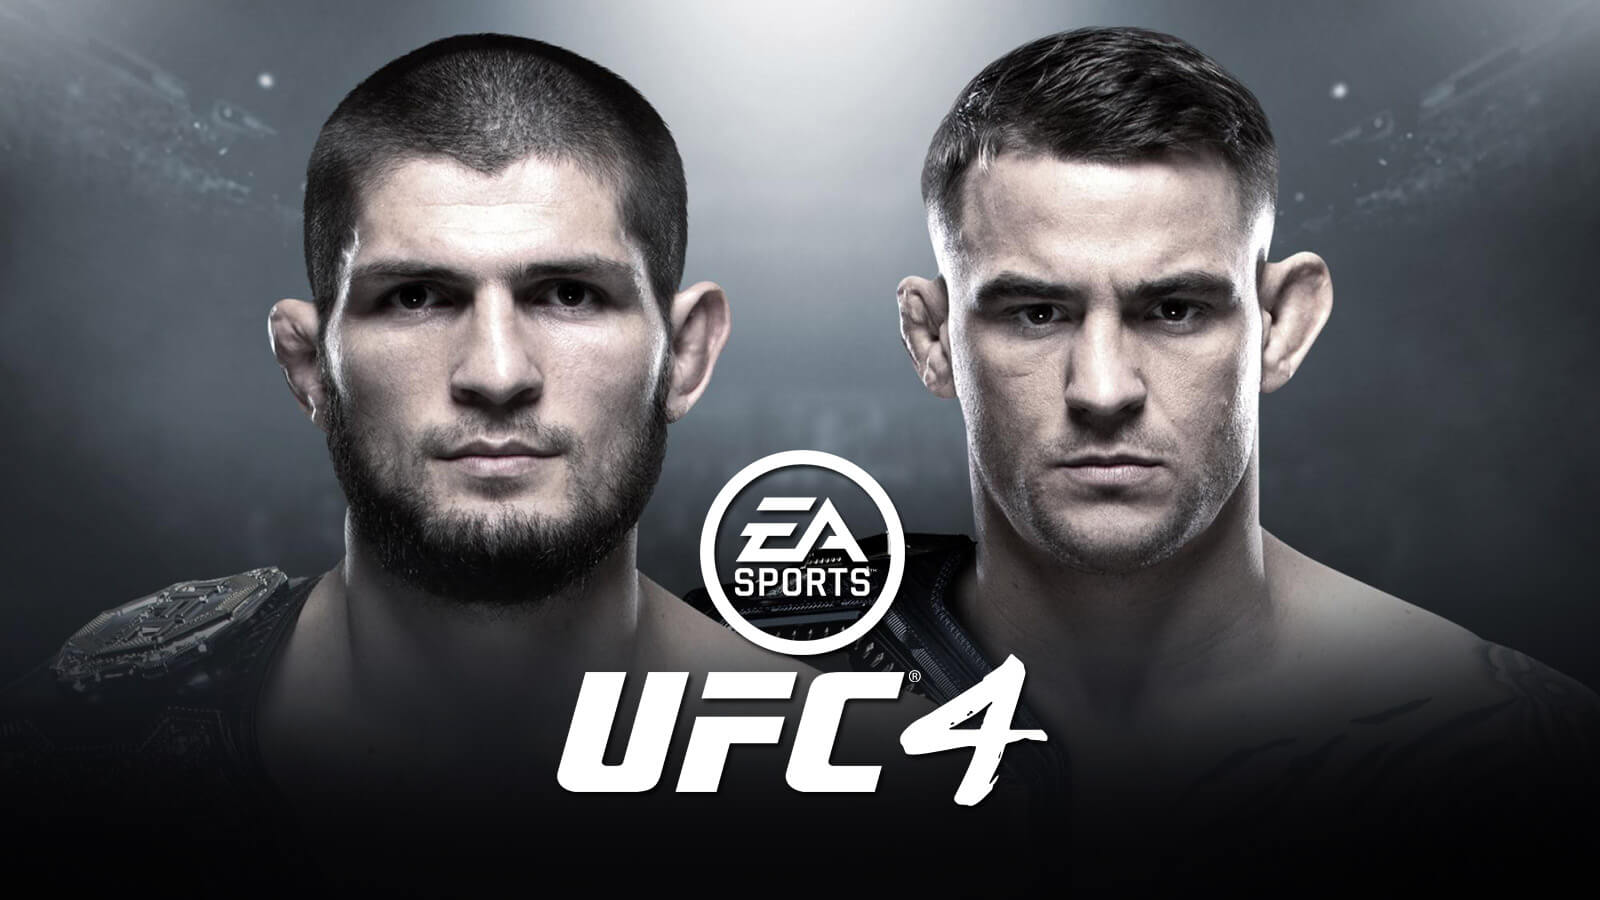 ea sports ufc 4 ppsspp download